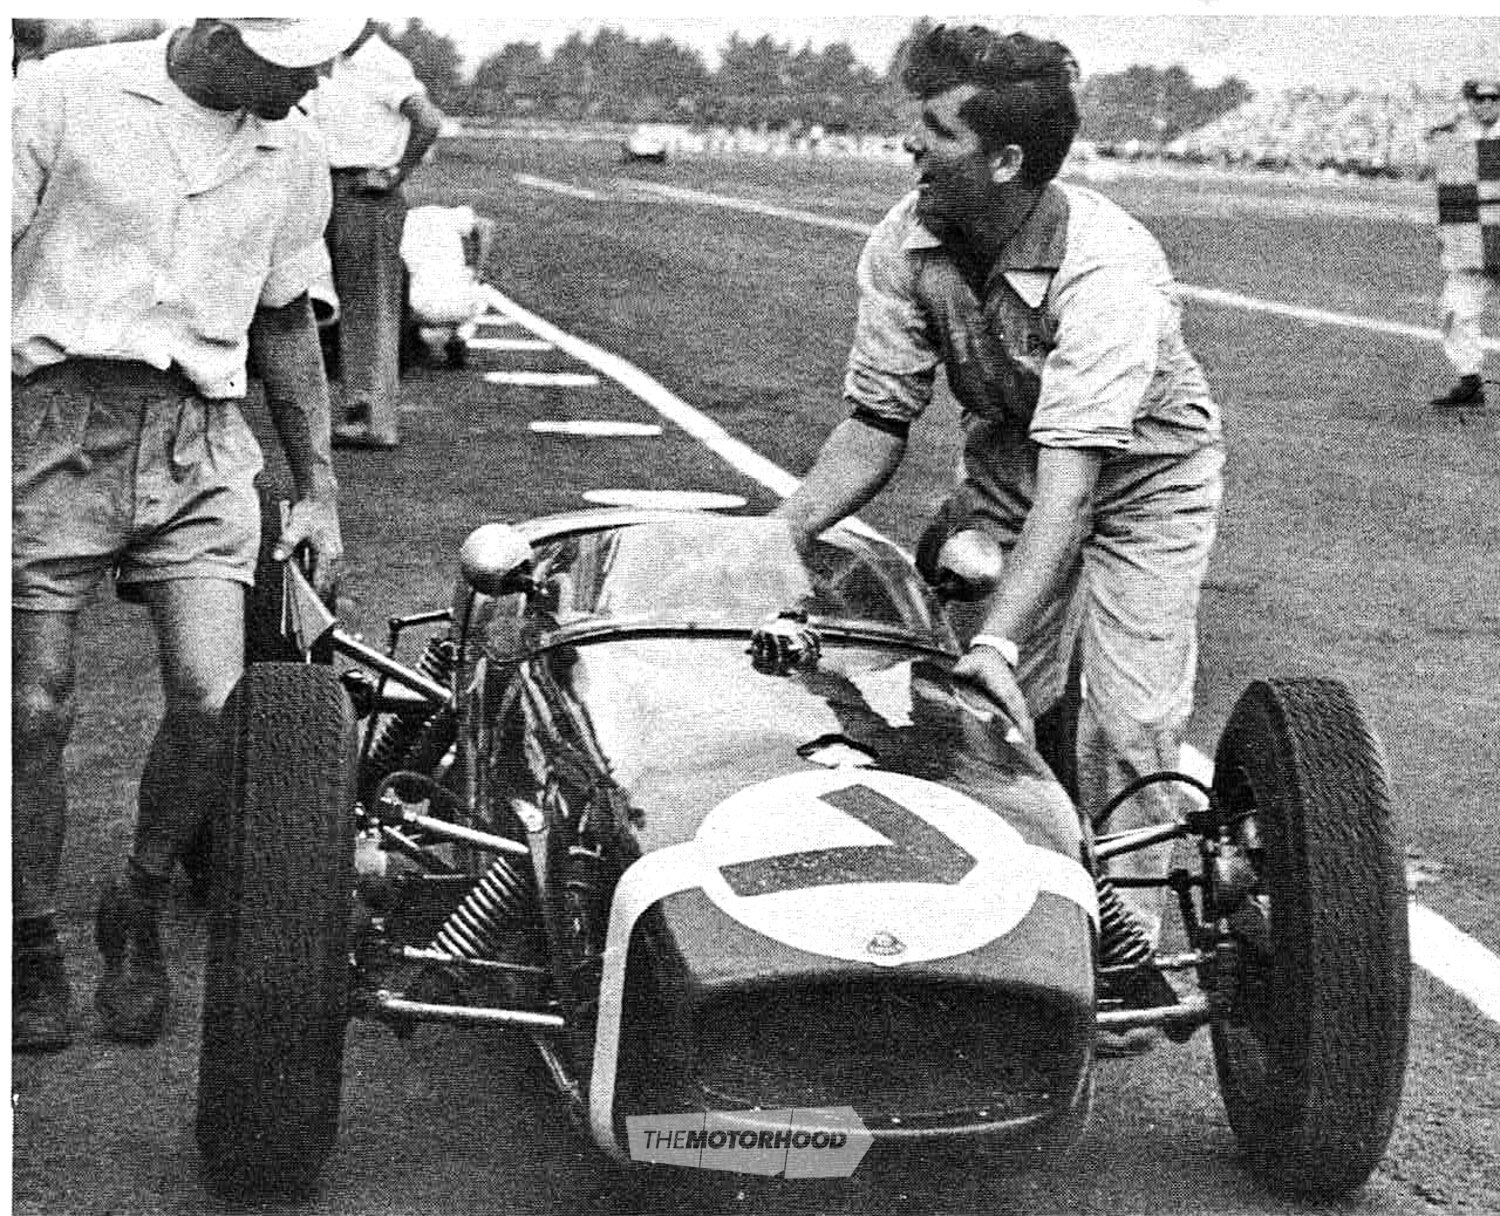 A mechanic pushes the stranded Moss Lotus into the Ardmore pits. Stirling had been leading the 1961 NZGP in the Rob Walker car when the transmission failed